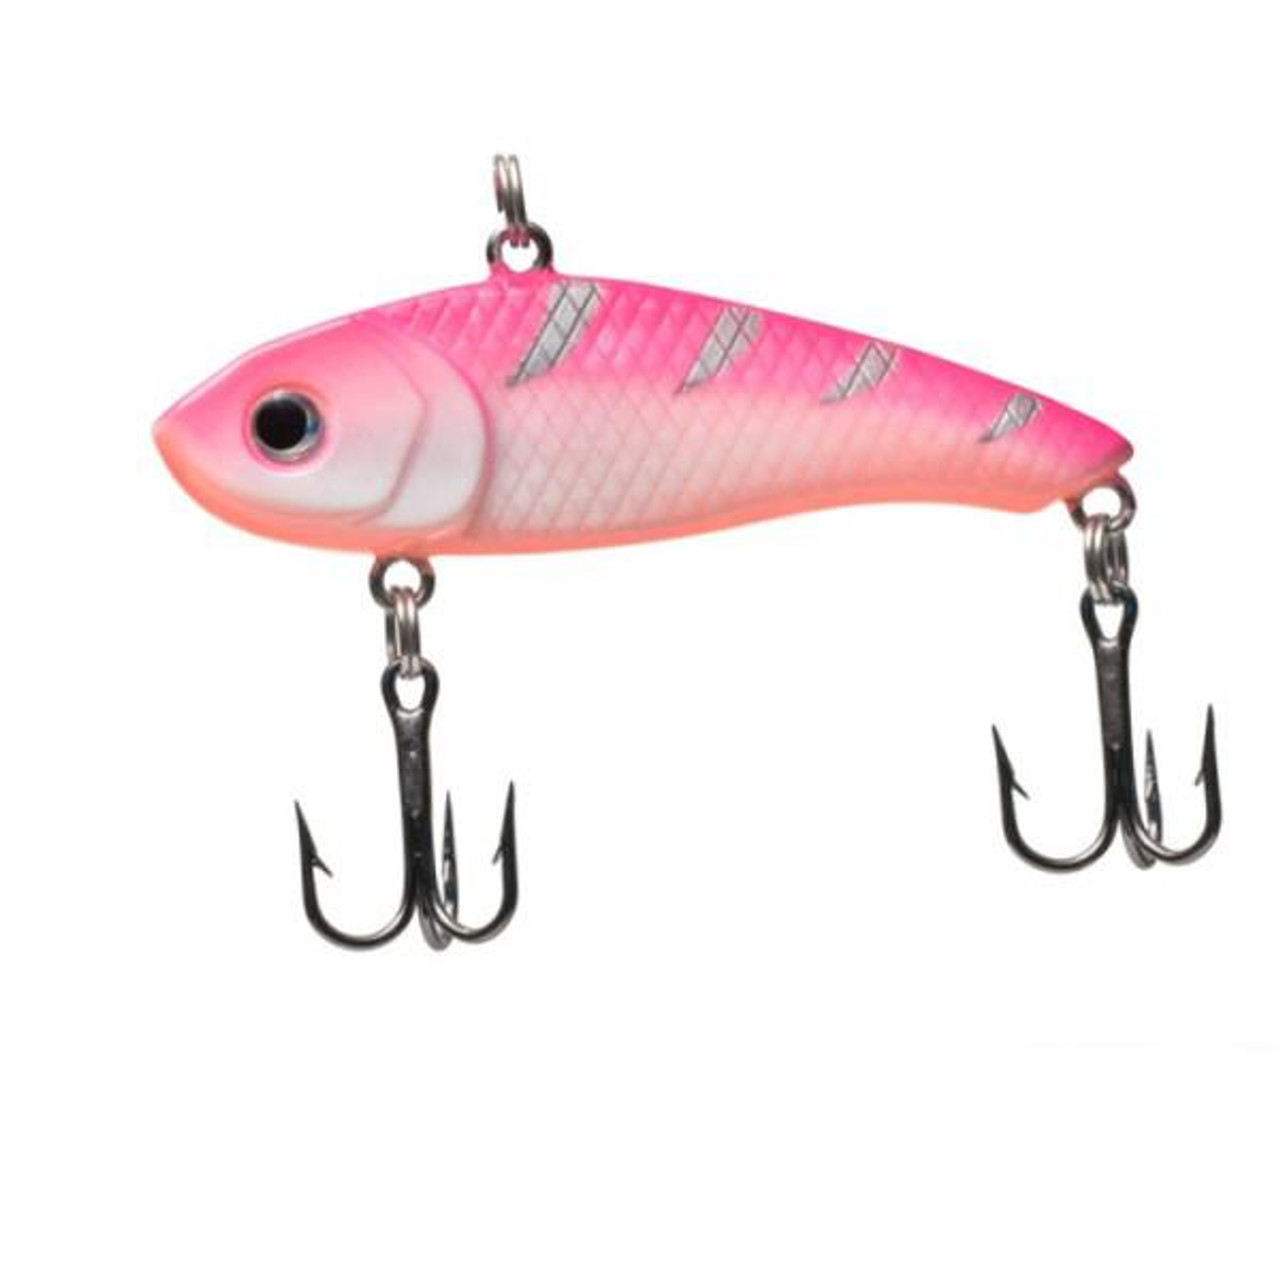 LKL 5pcs Fishing Lures Weights Pencil Sinking Fishing Lure Bass Fishing  Tackle Lures Fishing Accessories for Freshwater Trout Bass Salmon (Color :  Nike air max Pink, Size : 100mm 18G) : 